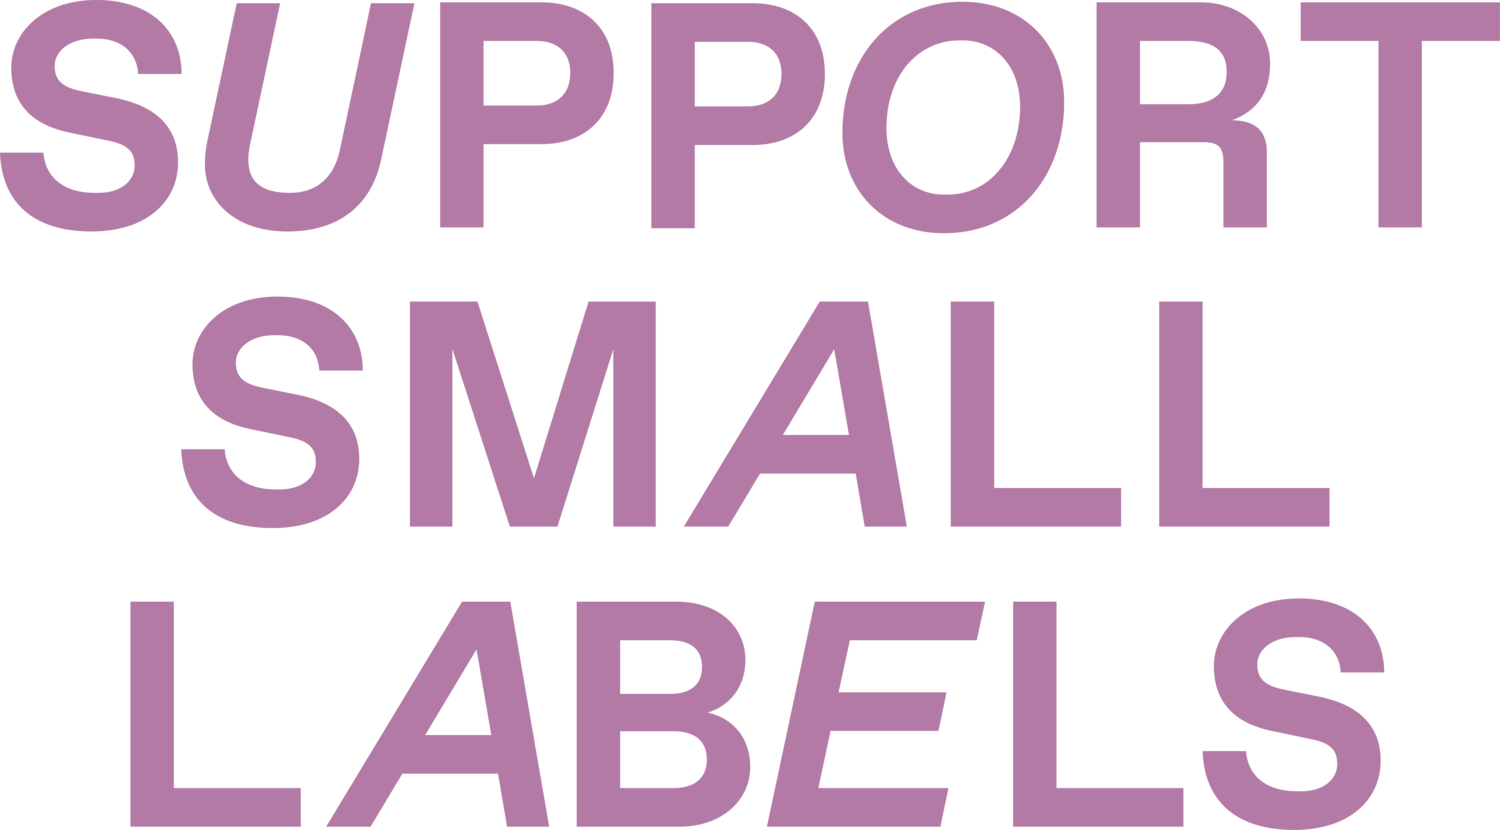 SUPPORT SMALL LABELS